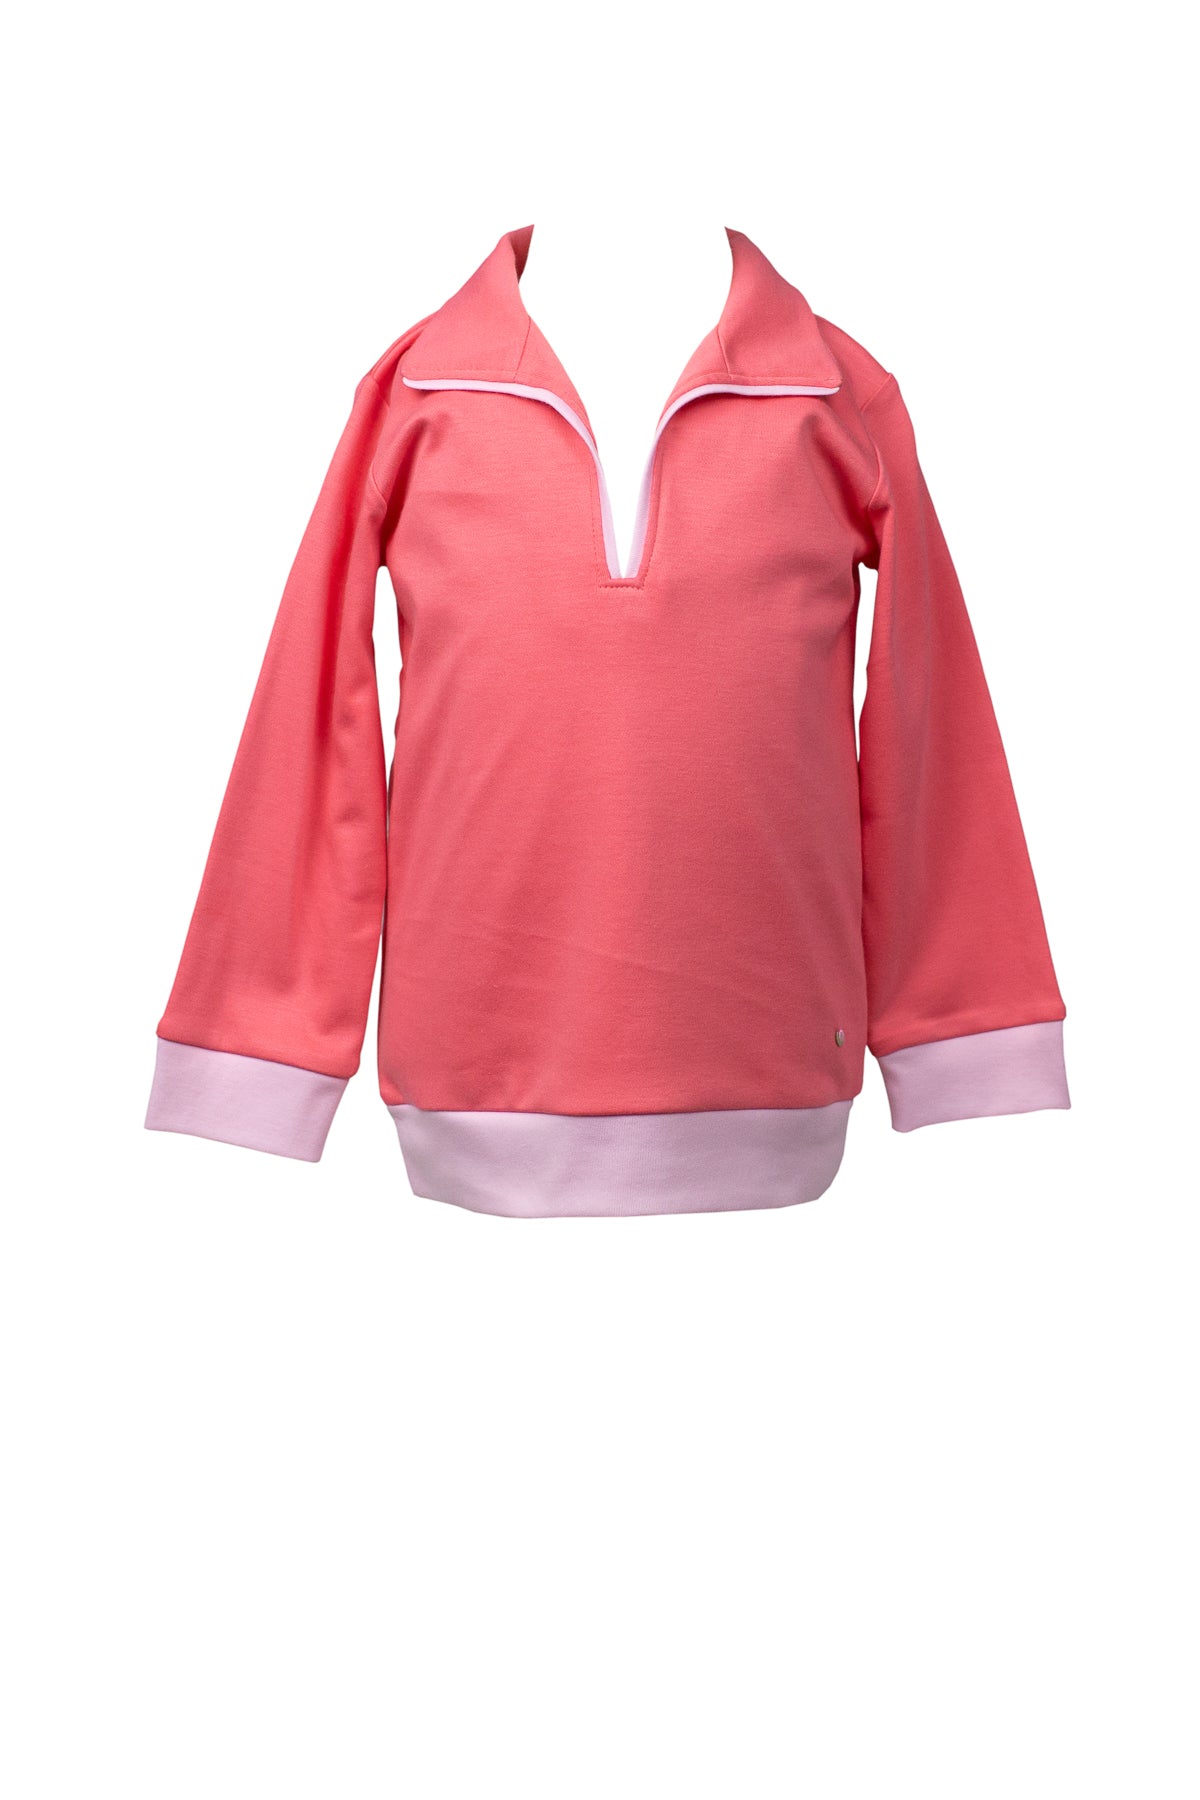 Flamingo Pink Pullover